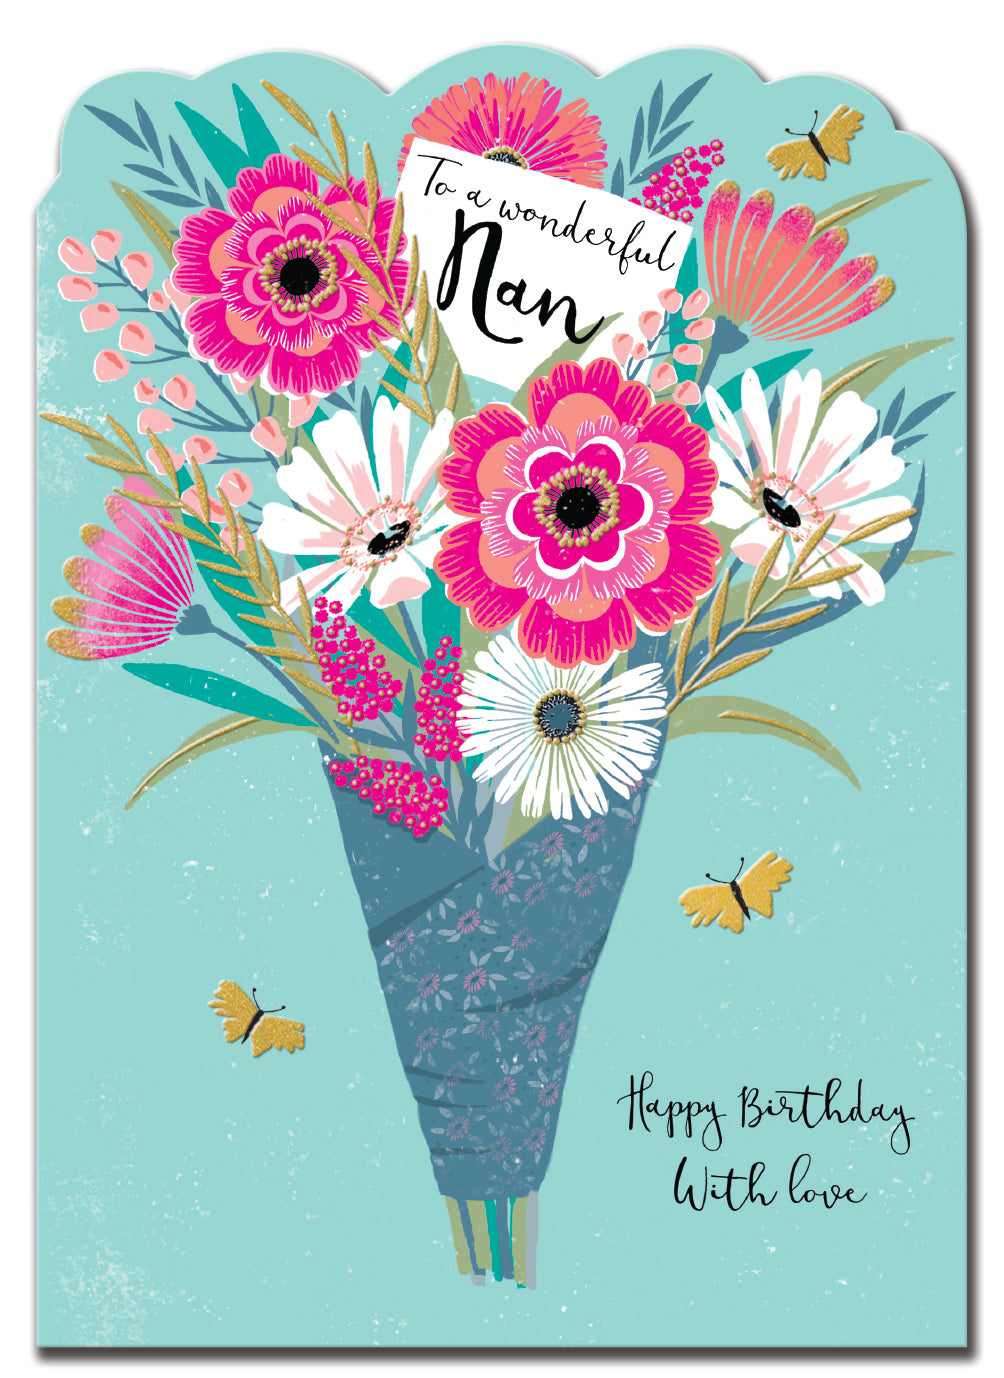 Wonderful Nan Bouquet Cut Out Birthday Card from Penny Black